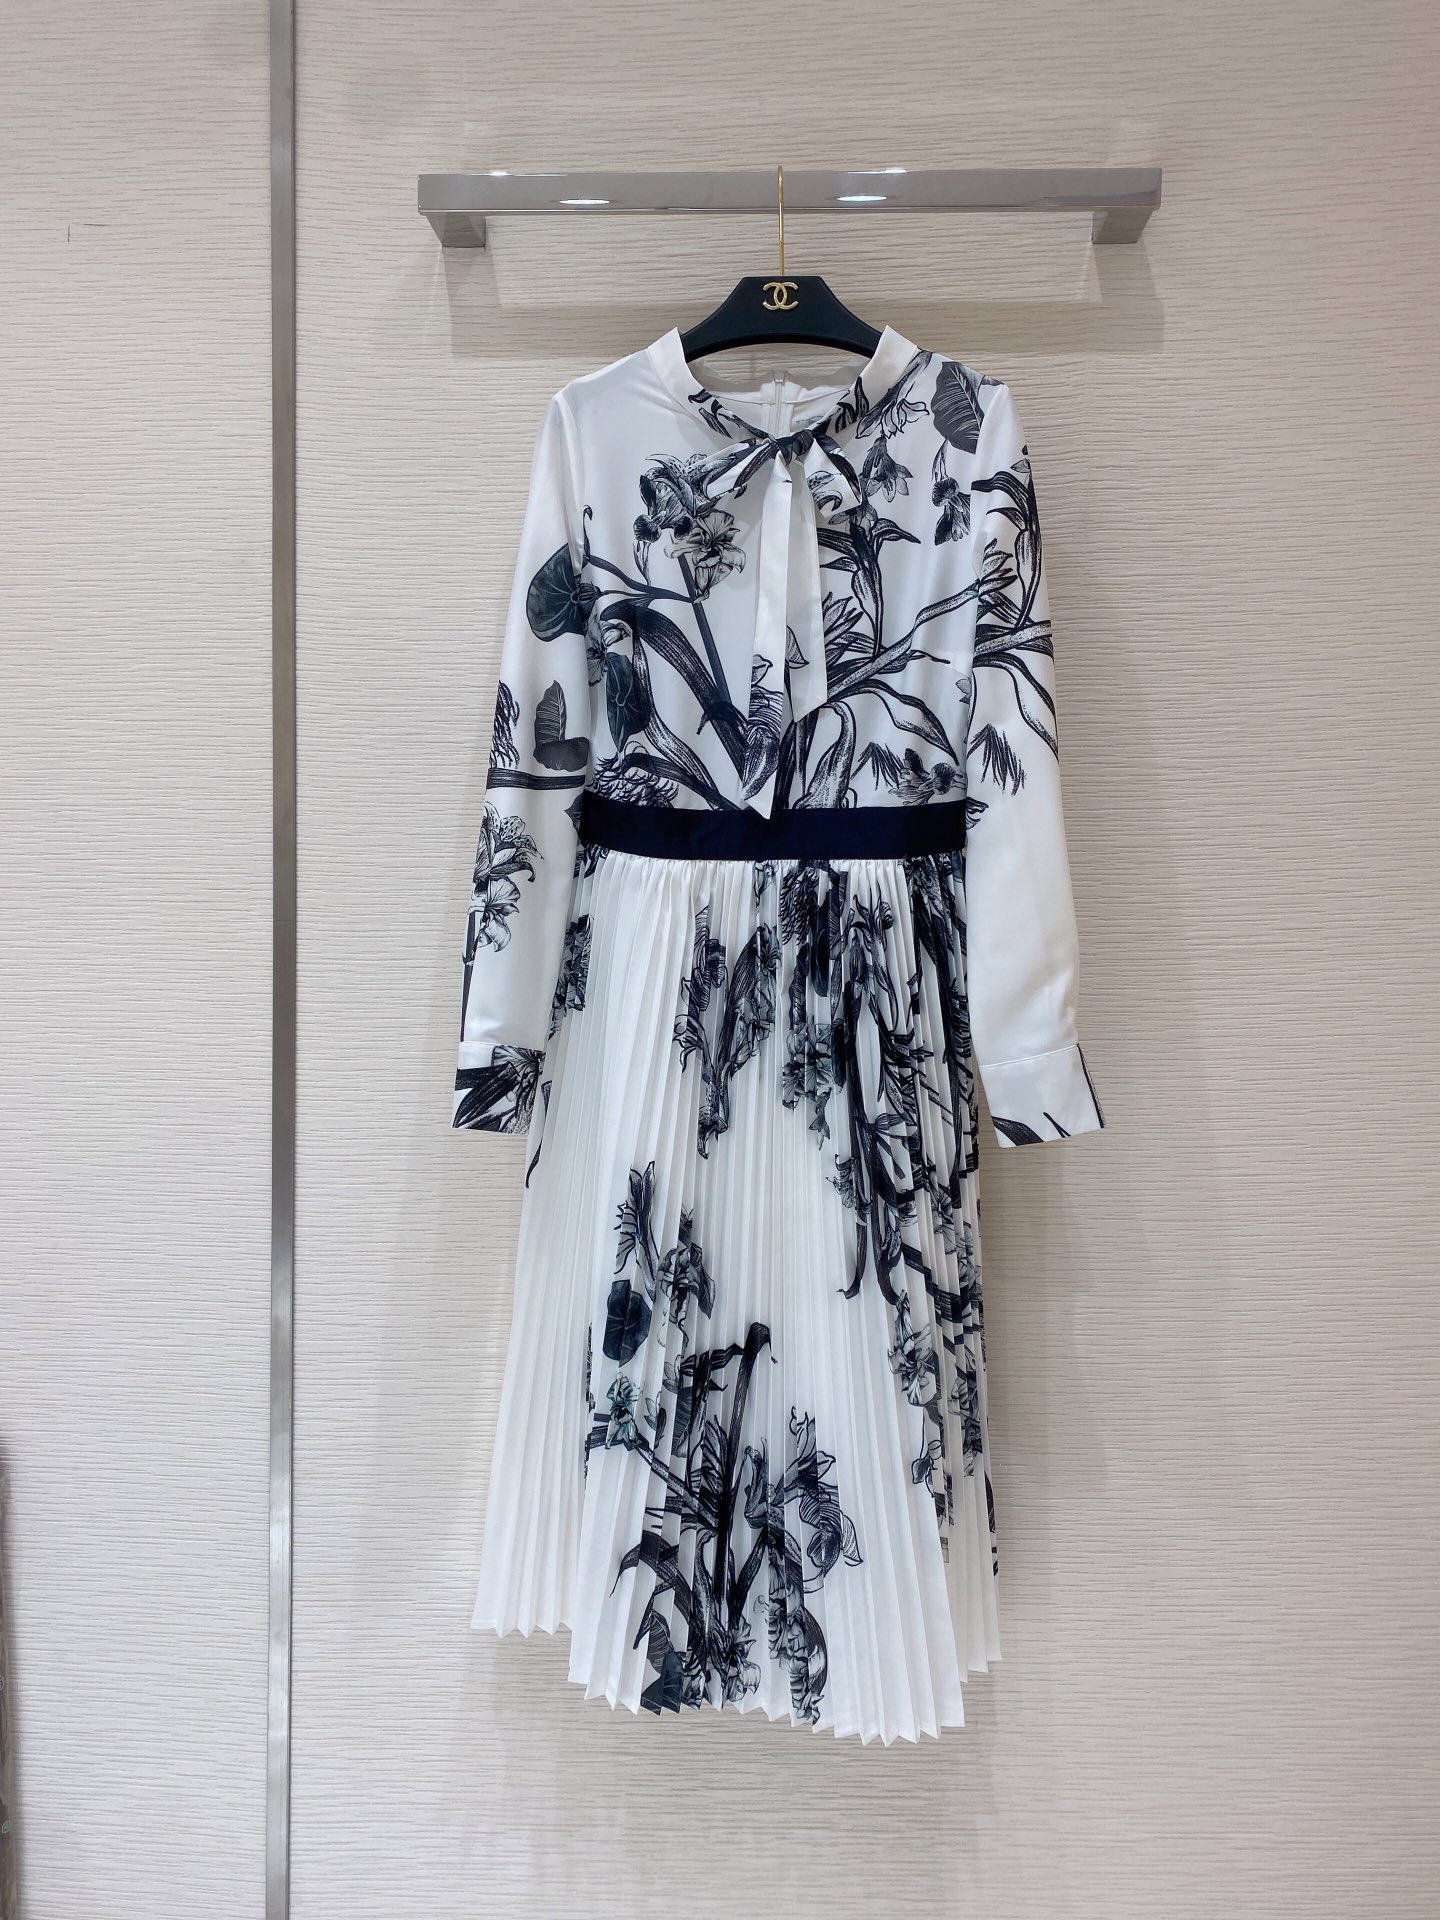 Best Replica New Style
 Dior Clothing Dresses Black White Printing Spring/Summer Collection